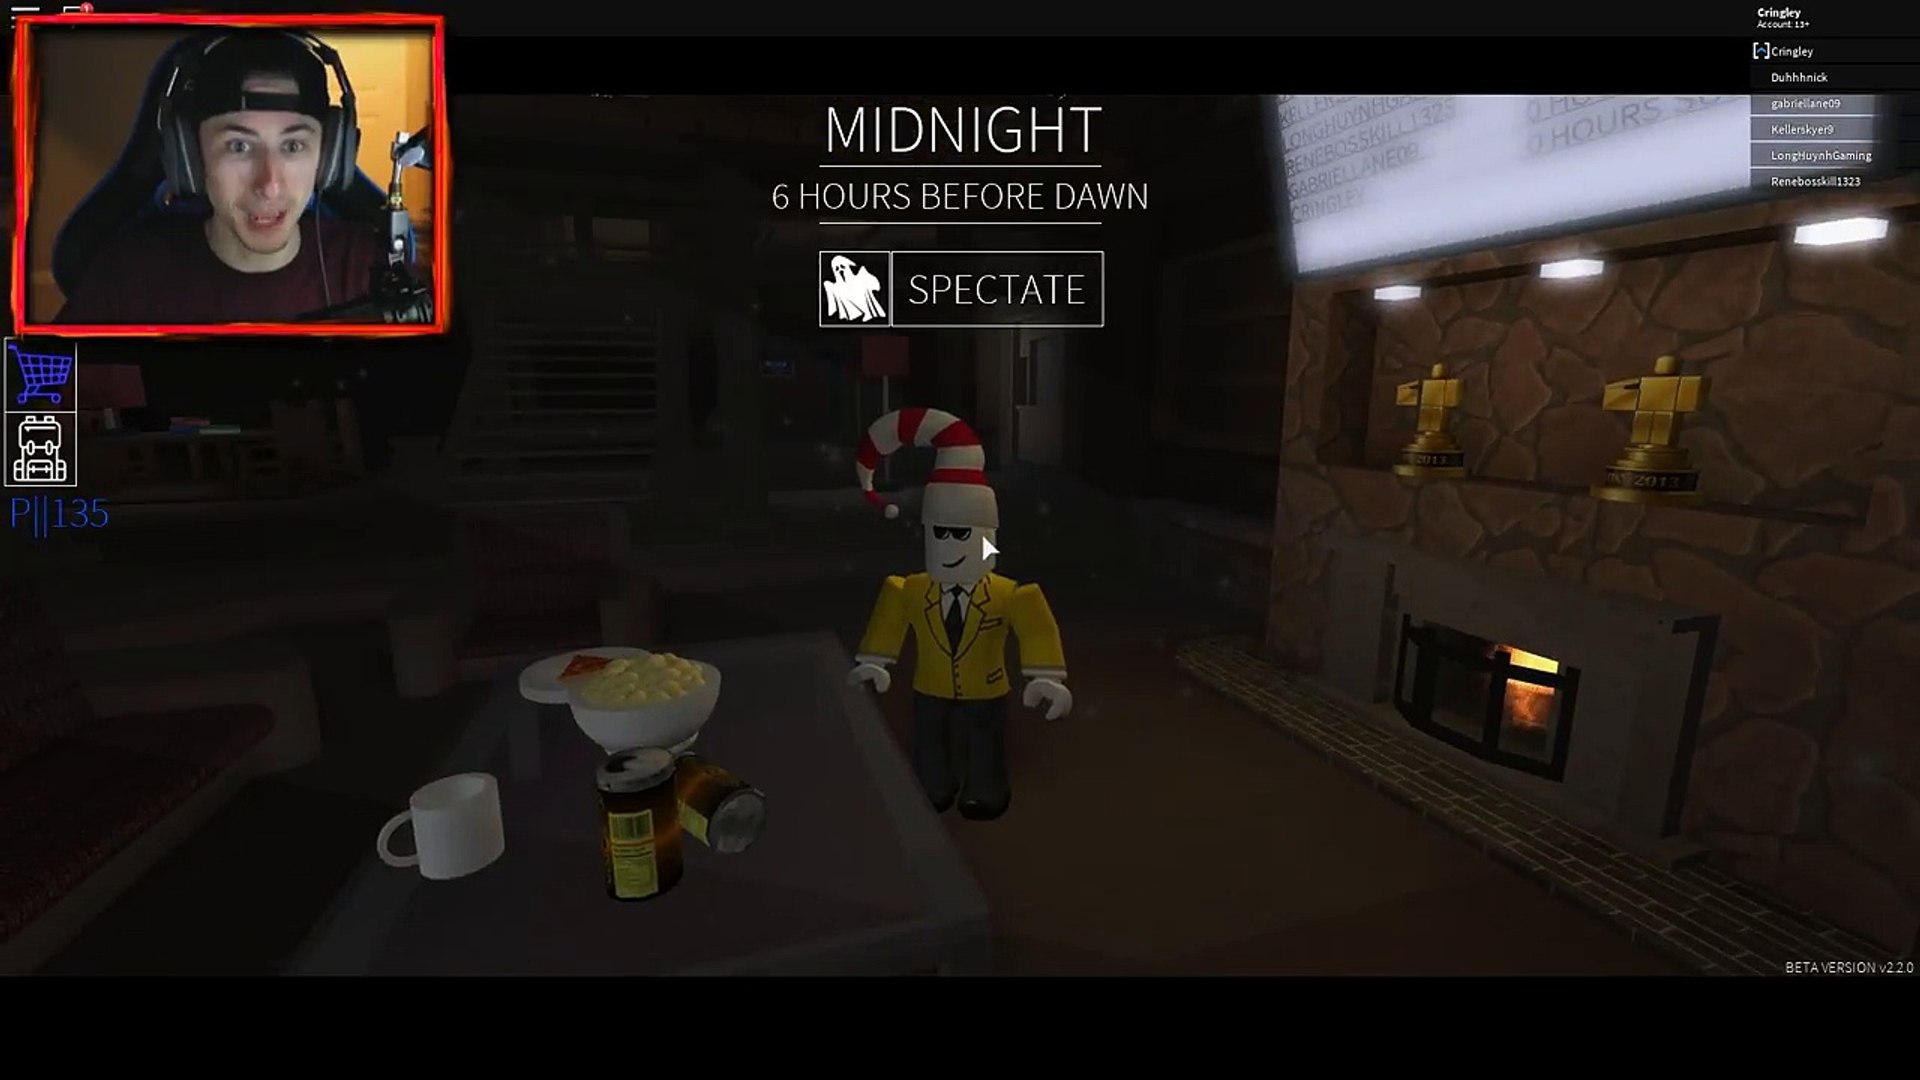 Do Not Play Roblox At 3am Or This Will Happen Video Dailymotion - don t watch creepy roblox videos at 3 am or this happens roblox